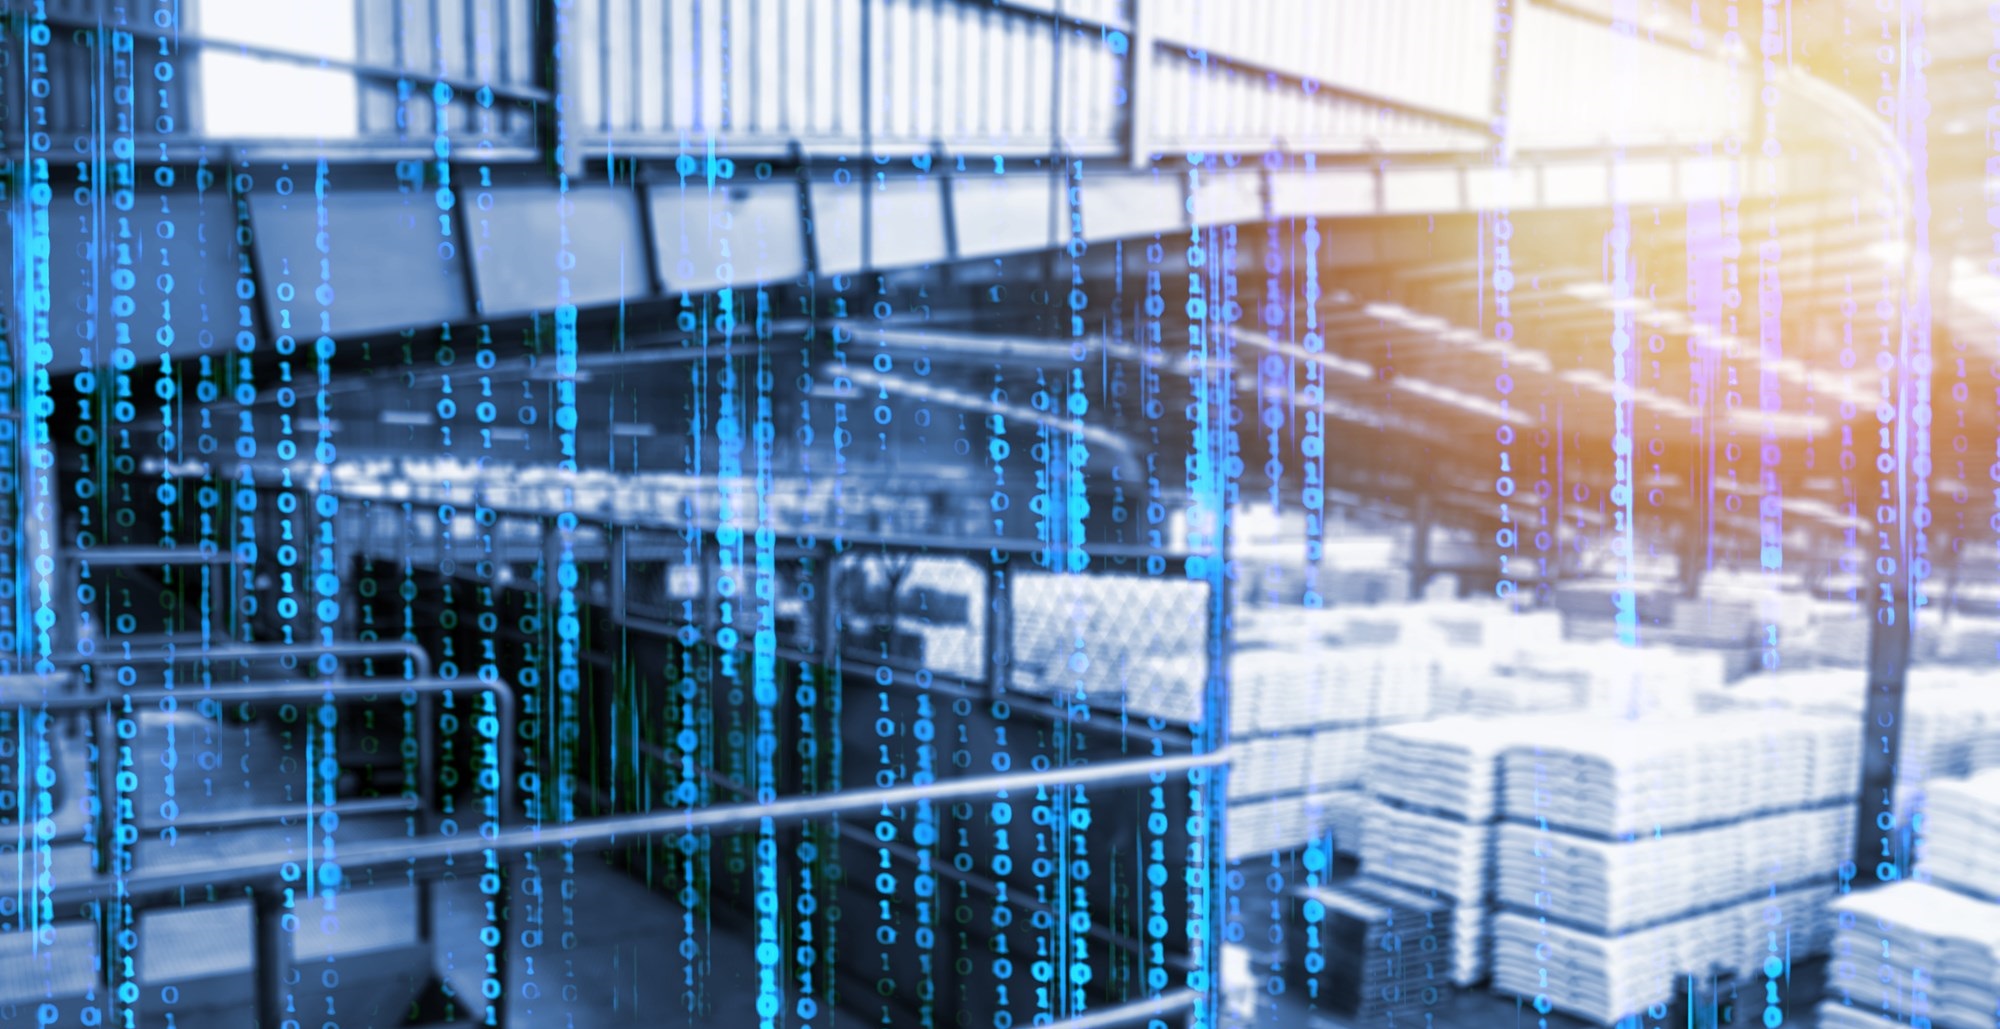  A Path to Increased Capacity at a New Industrial Supply Center - IoT ONE Case Study